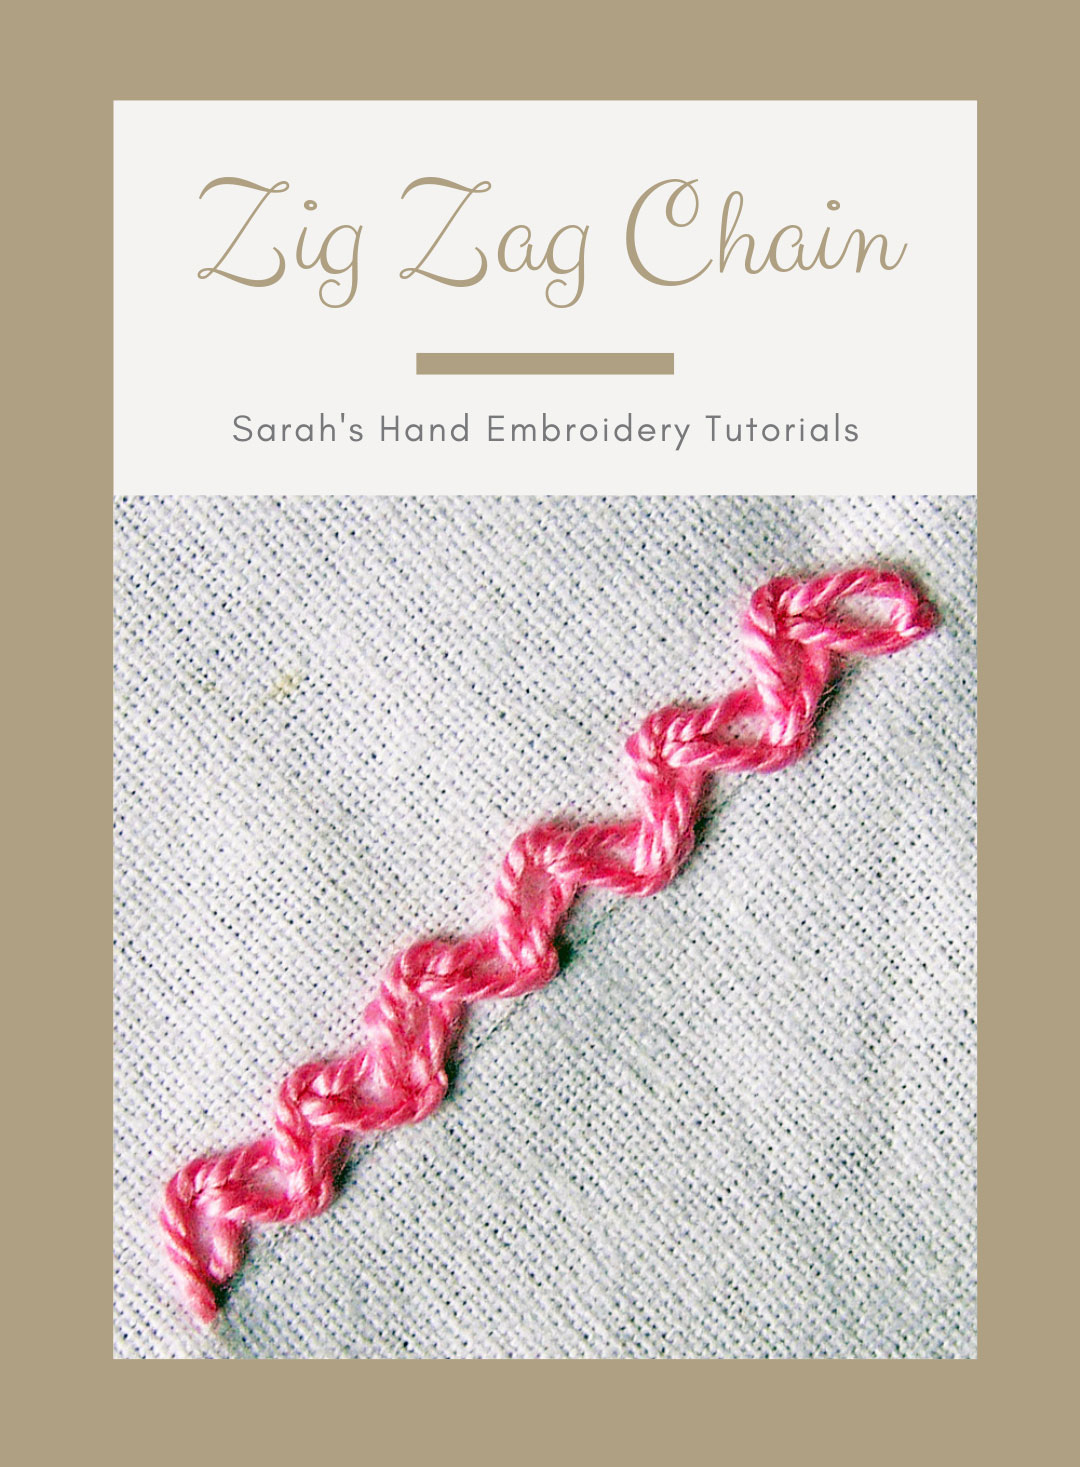 How to do the Back Stitch - Sarah's Hand Embroidery Tutorials